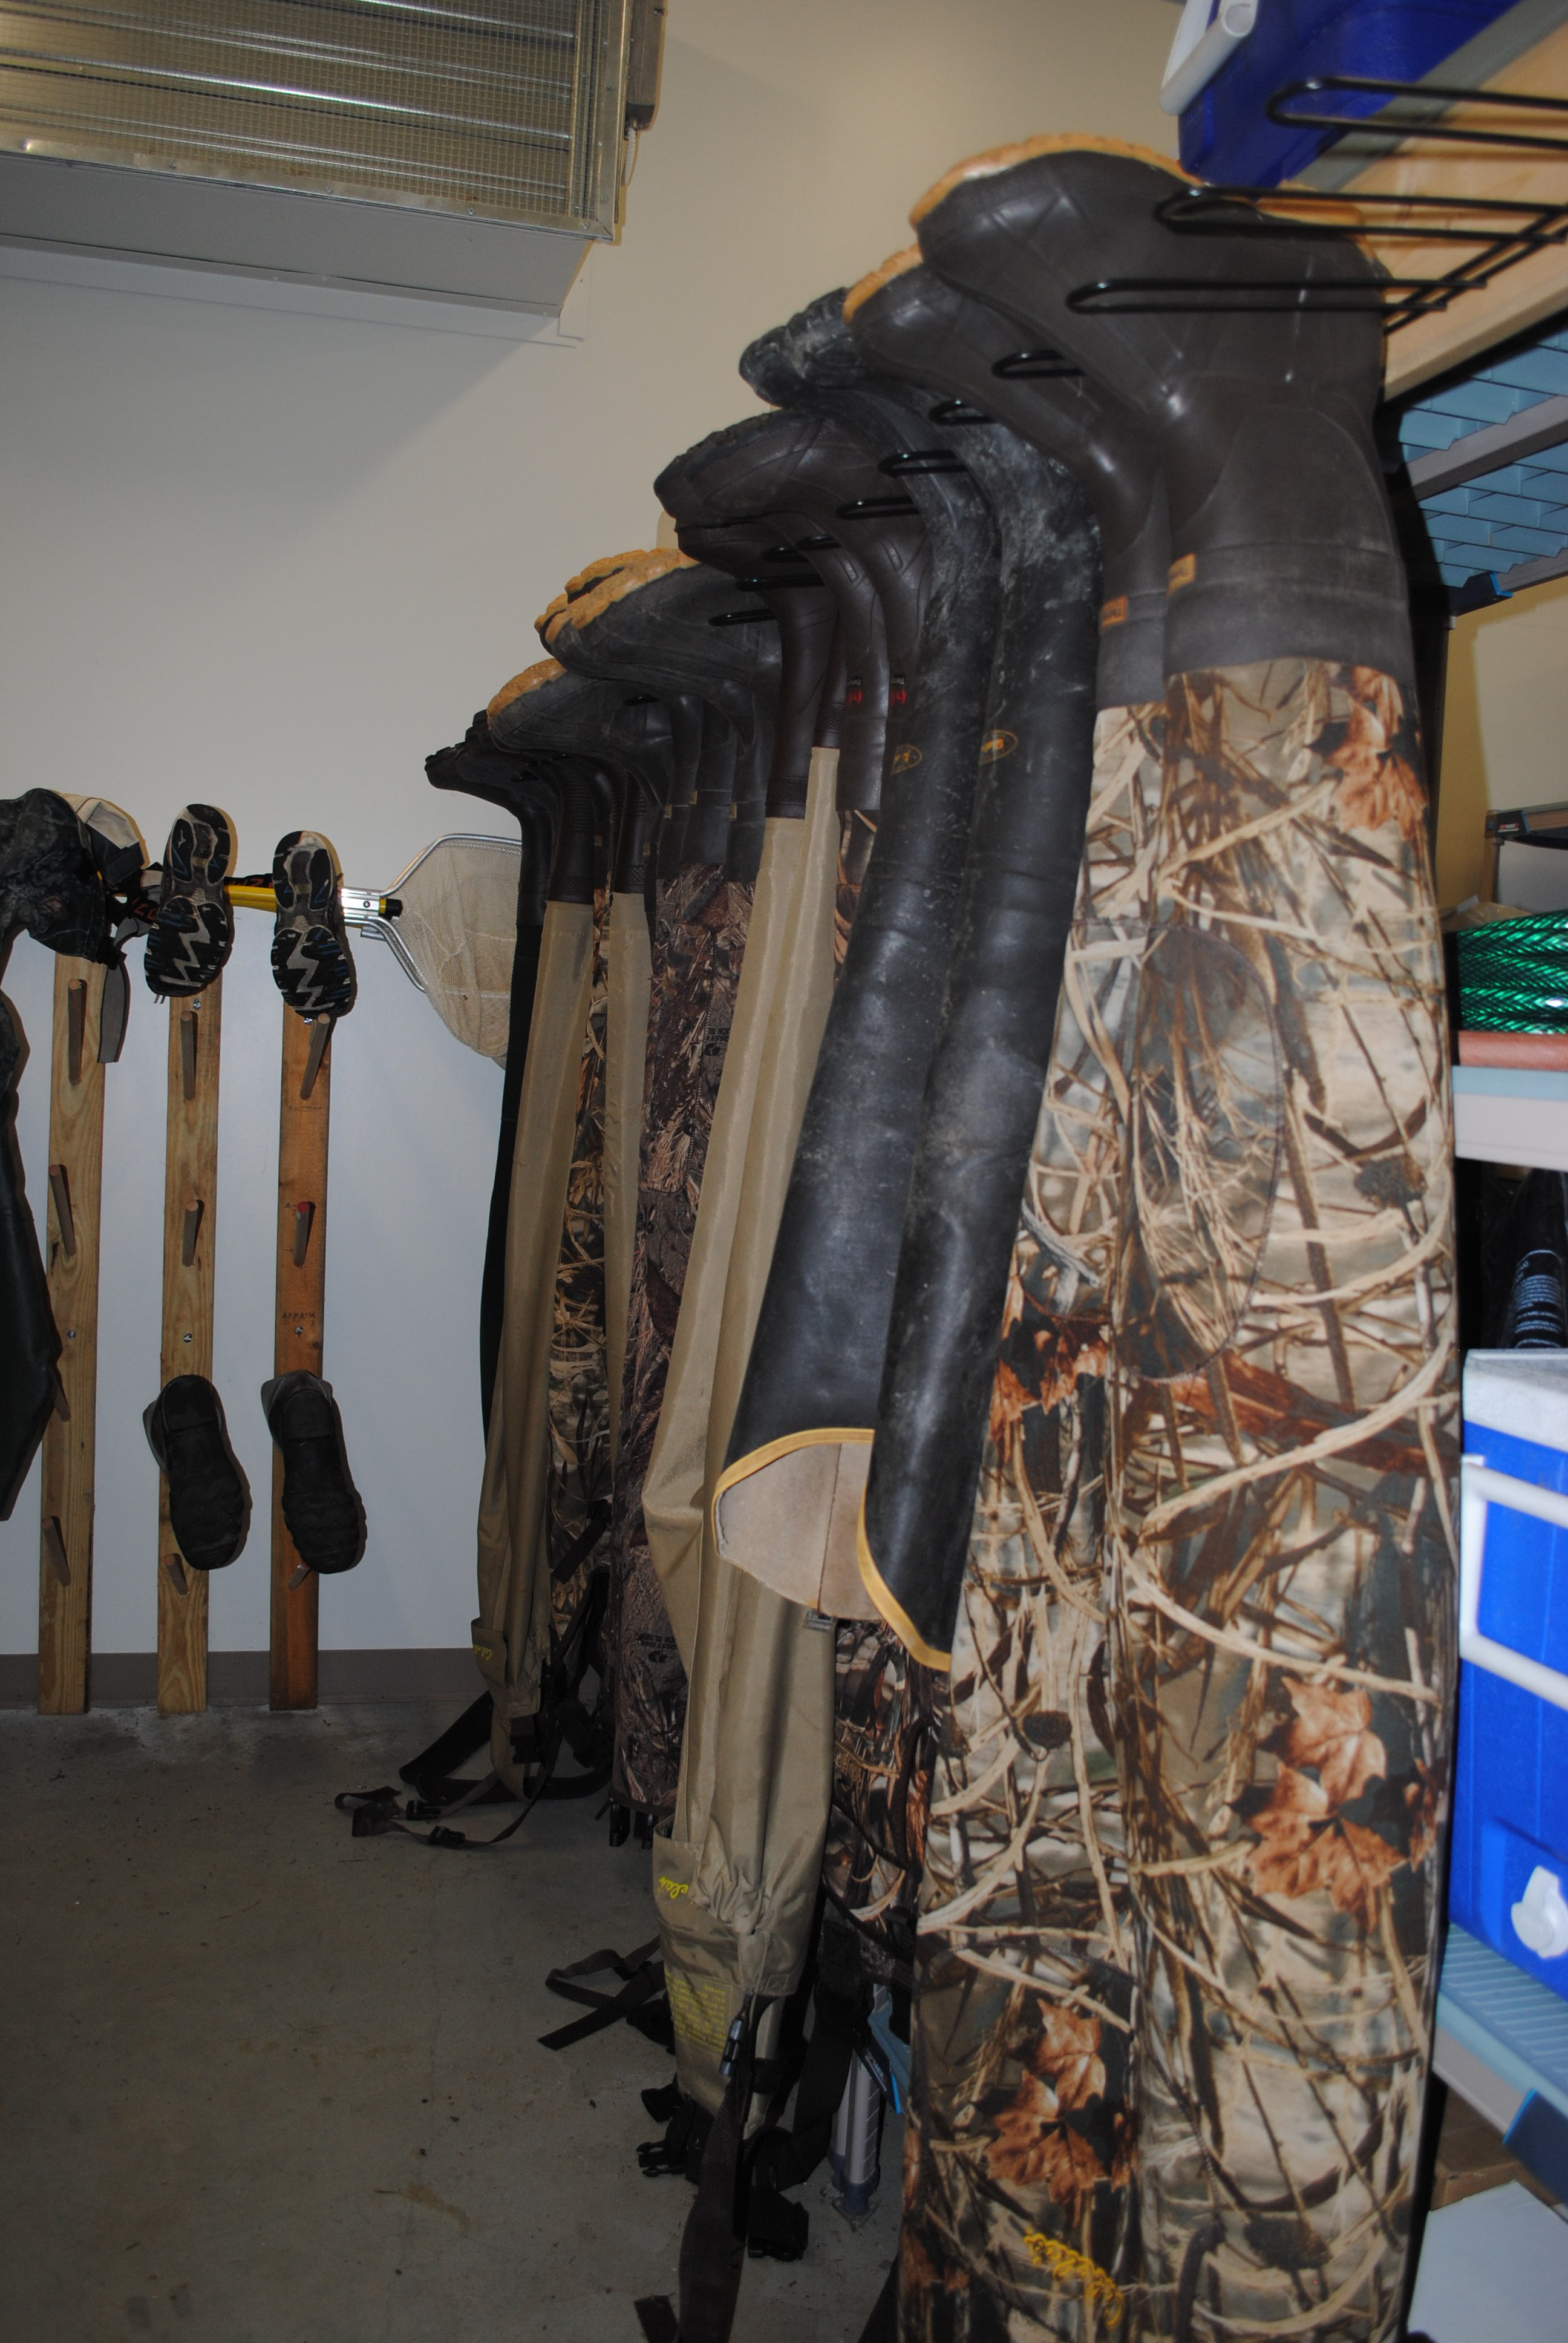 Rack of boots used in the wetlands at the Smithsonian Environmental Research Center. Photo by Kira Sobers, September 12, 2015.